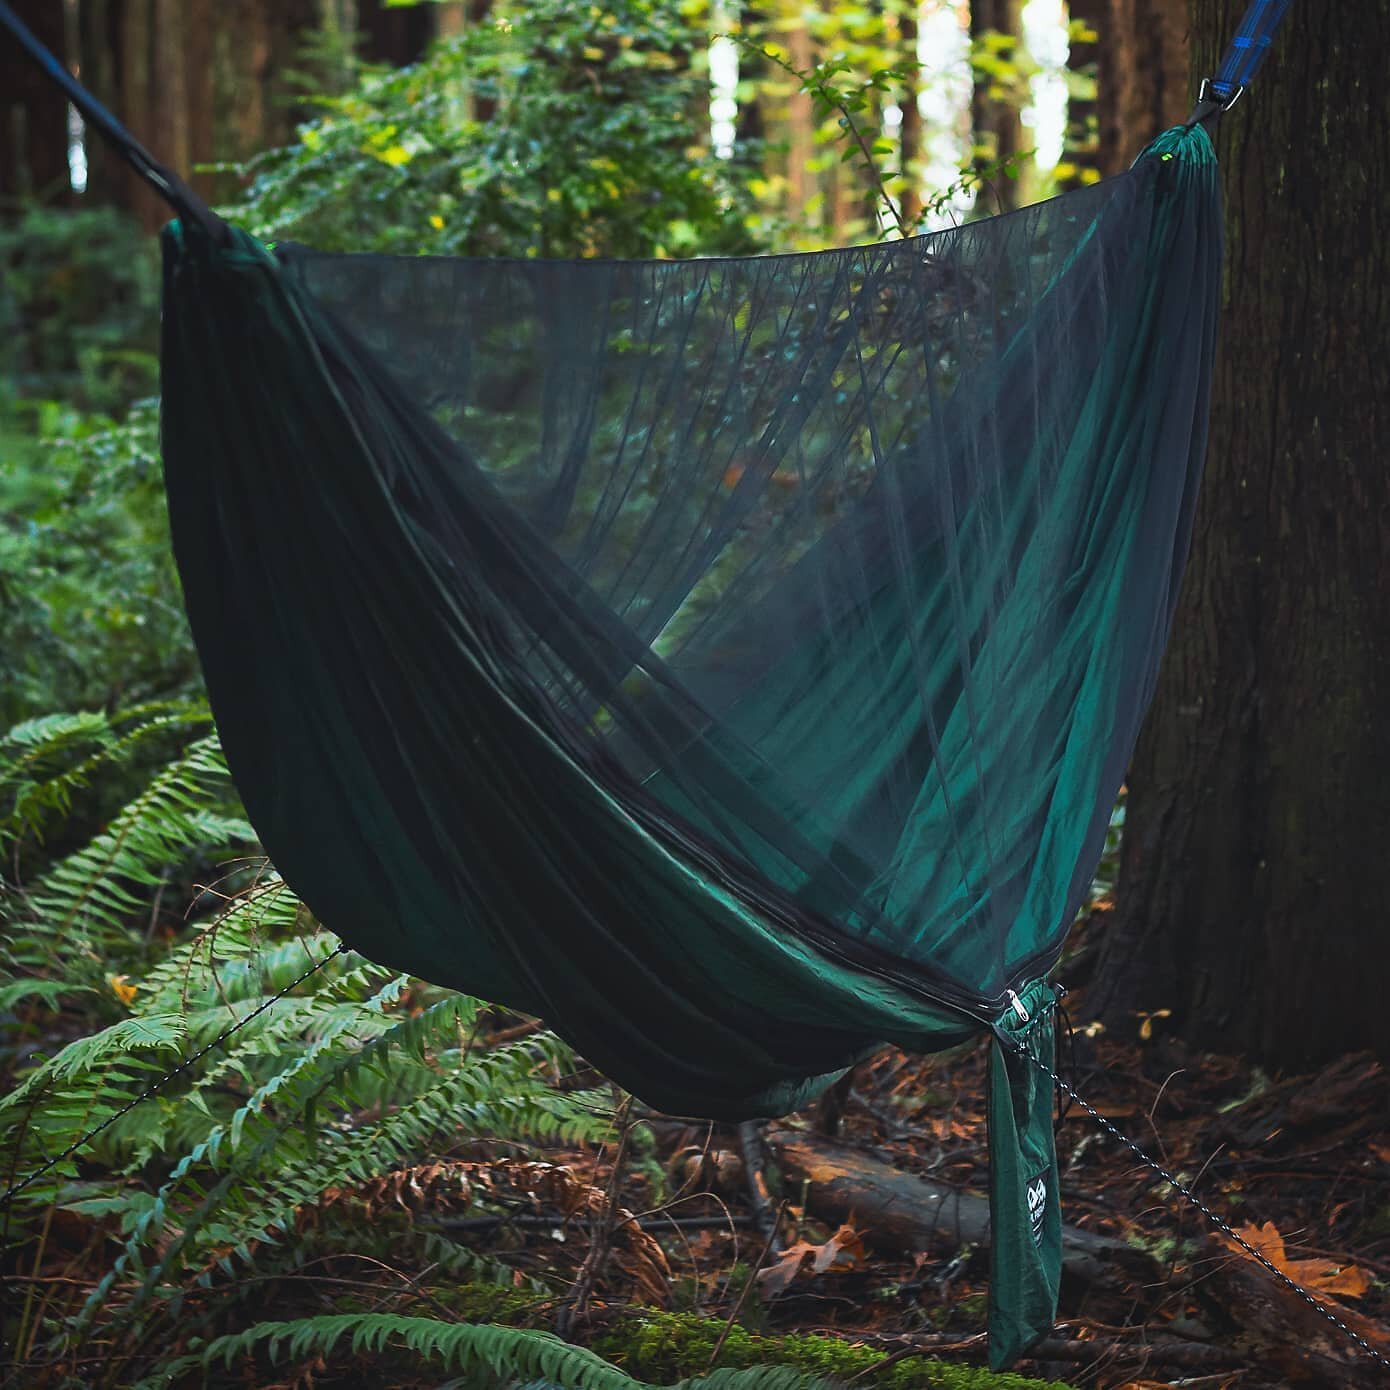 As the warm spring weather is upon us, the Camp Hammock is the perfect way to enjoy a comfortable, bug-free experience on your next outdoor adventure.🏕️ 
-
-
-
-
-
#TrailPrepared #YouBelongOutdoors #CampHammock #Hammock #ParachuteHammock #MosquitoNe